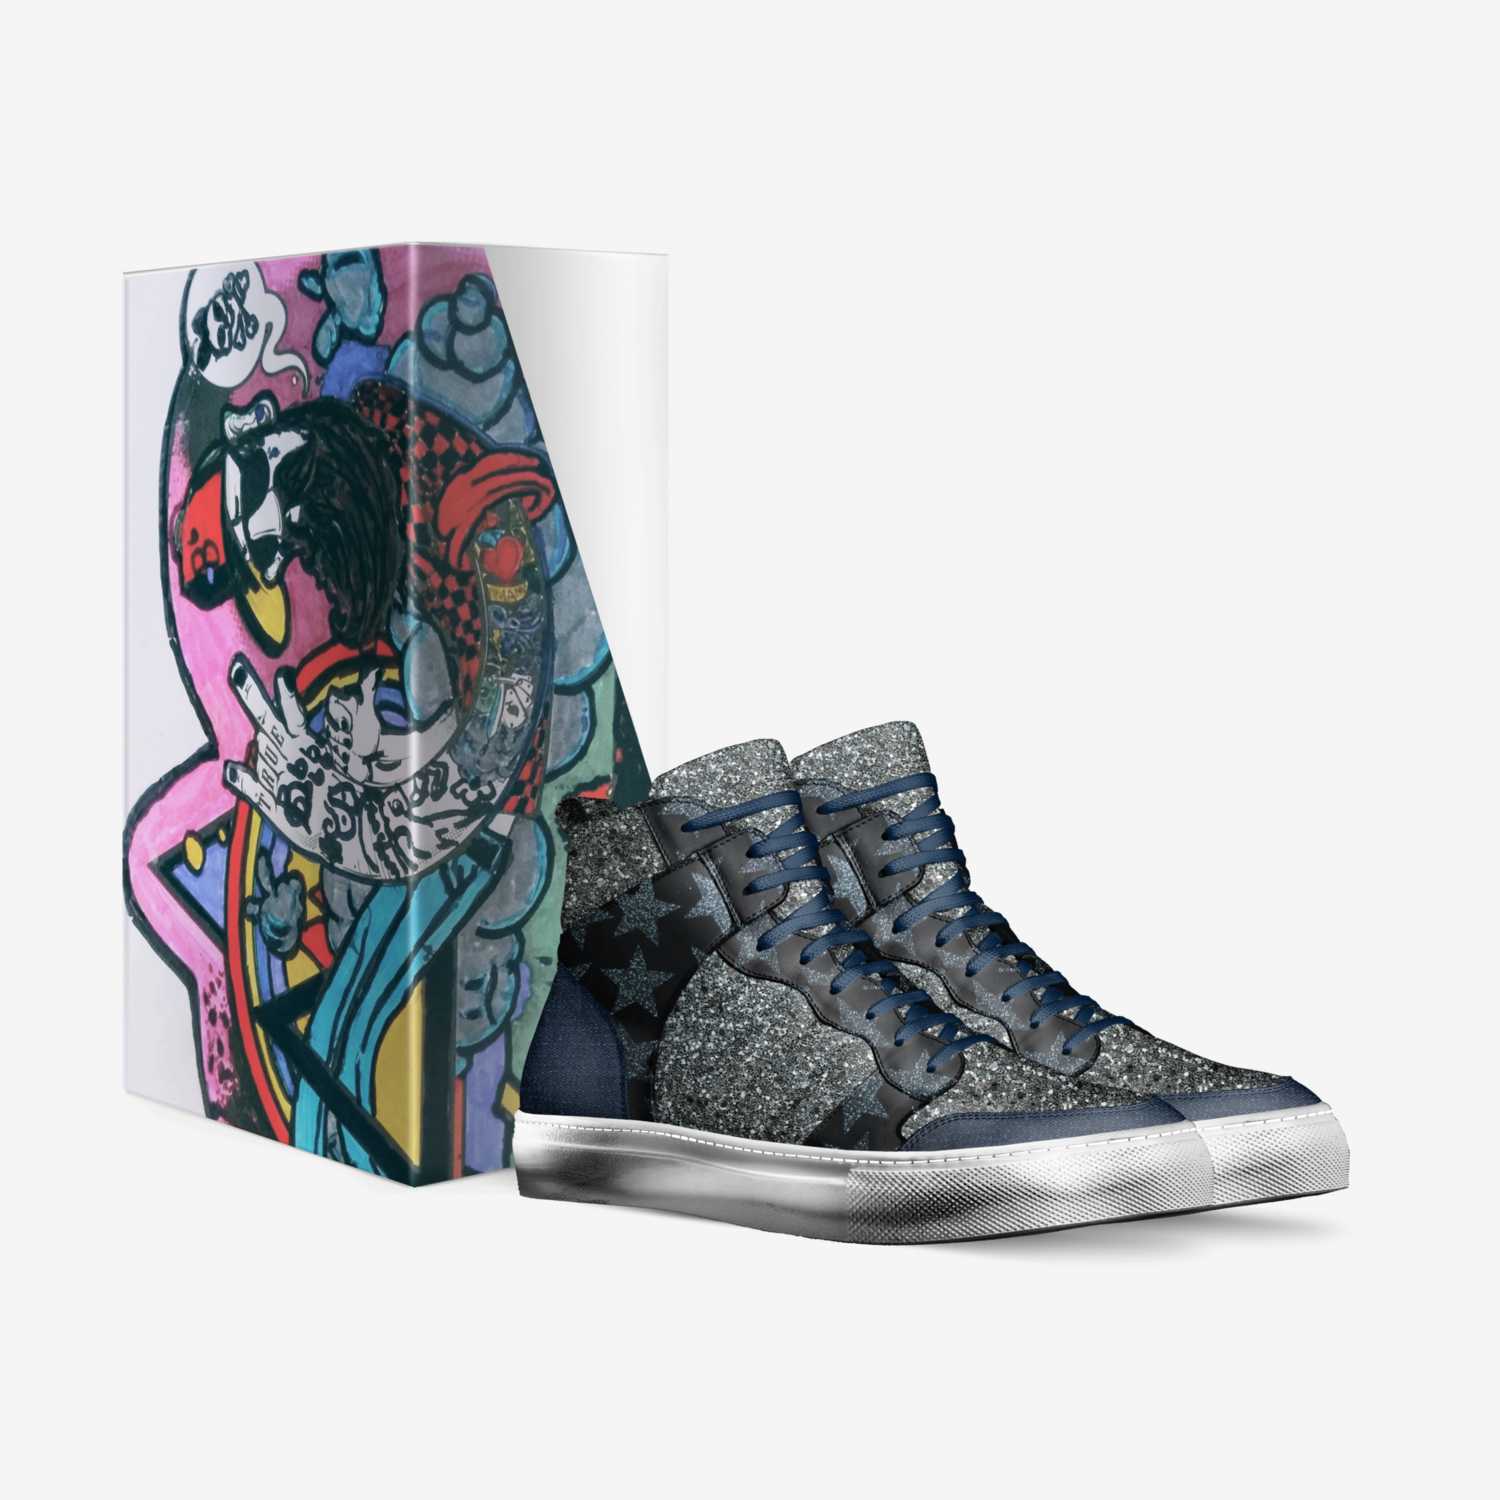 Myteam custom made in Italy shoes by Bradley Burnell | Box view